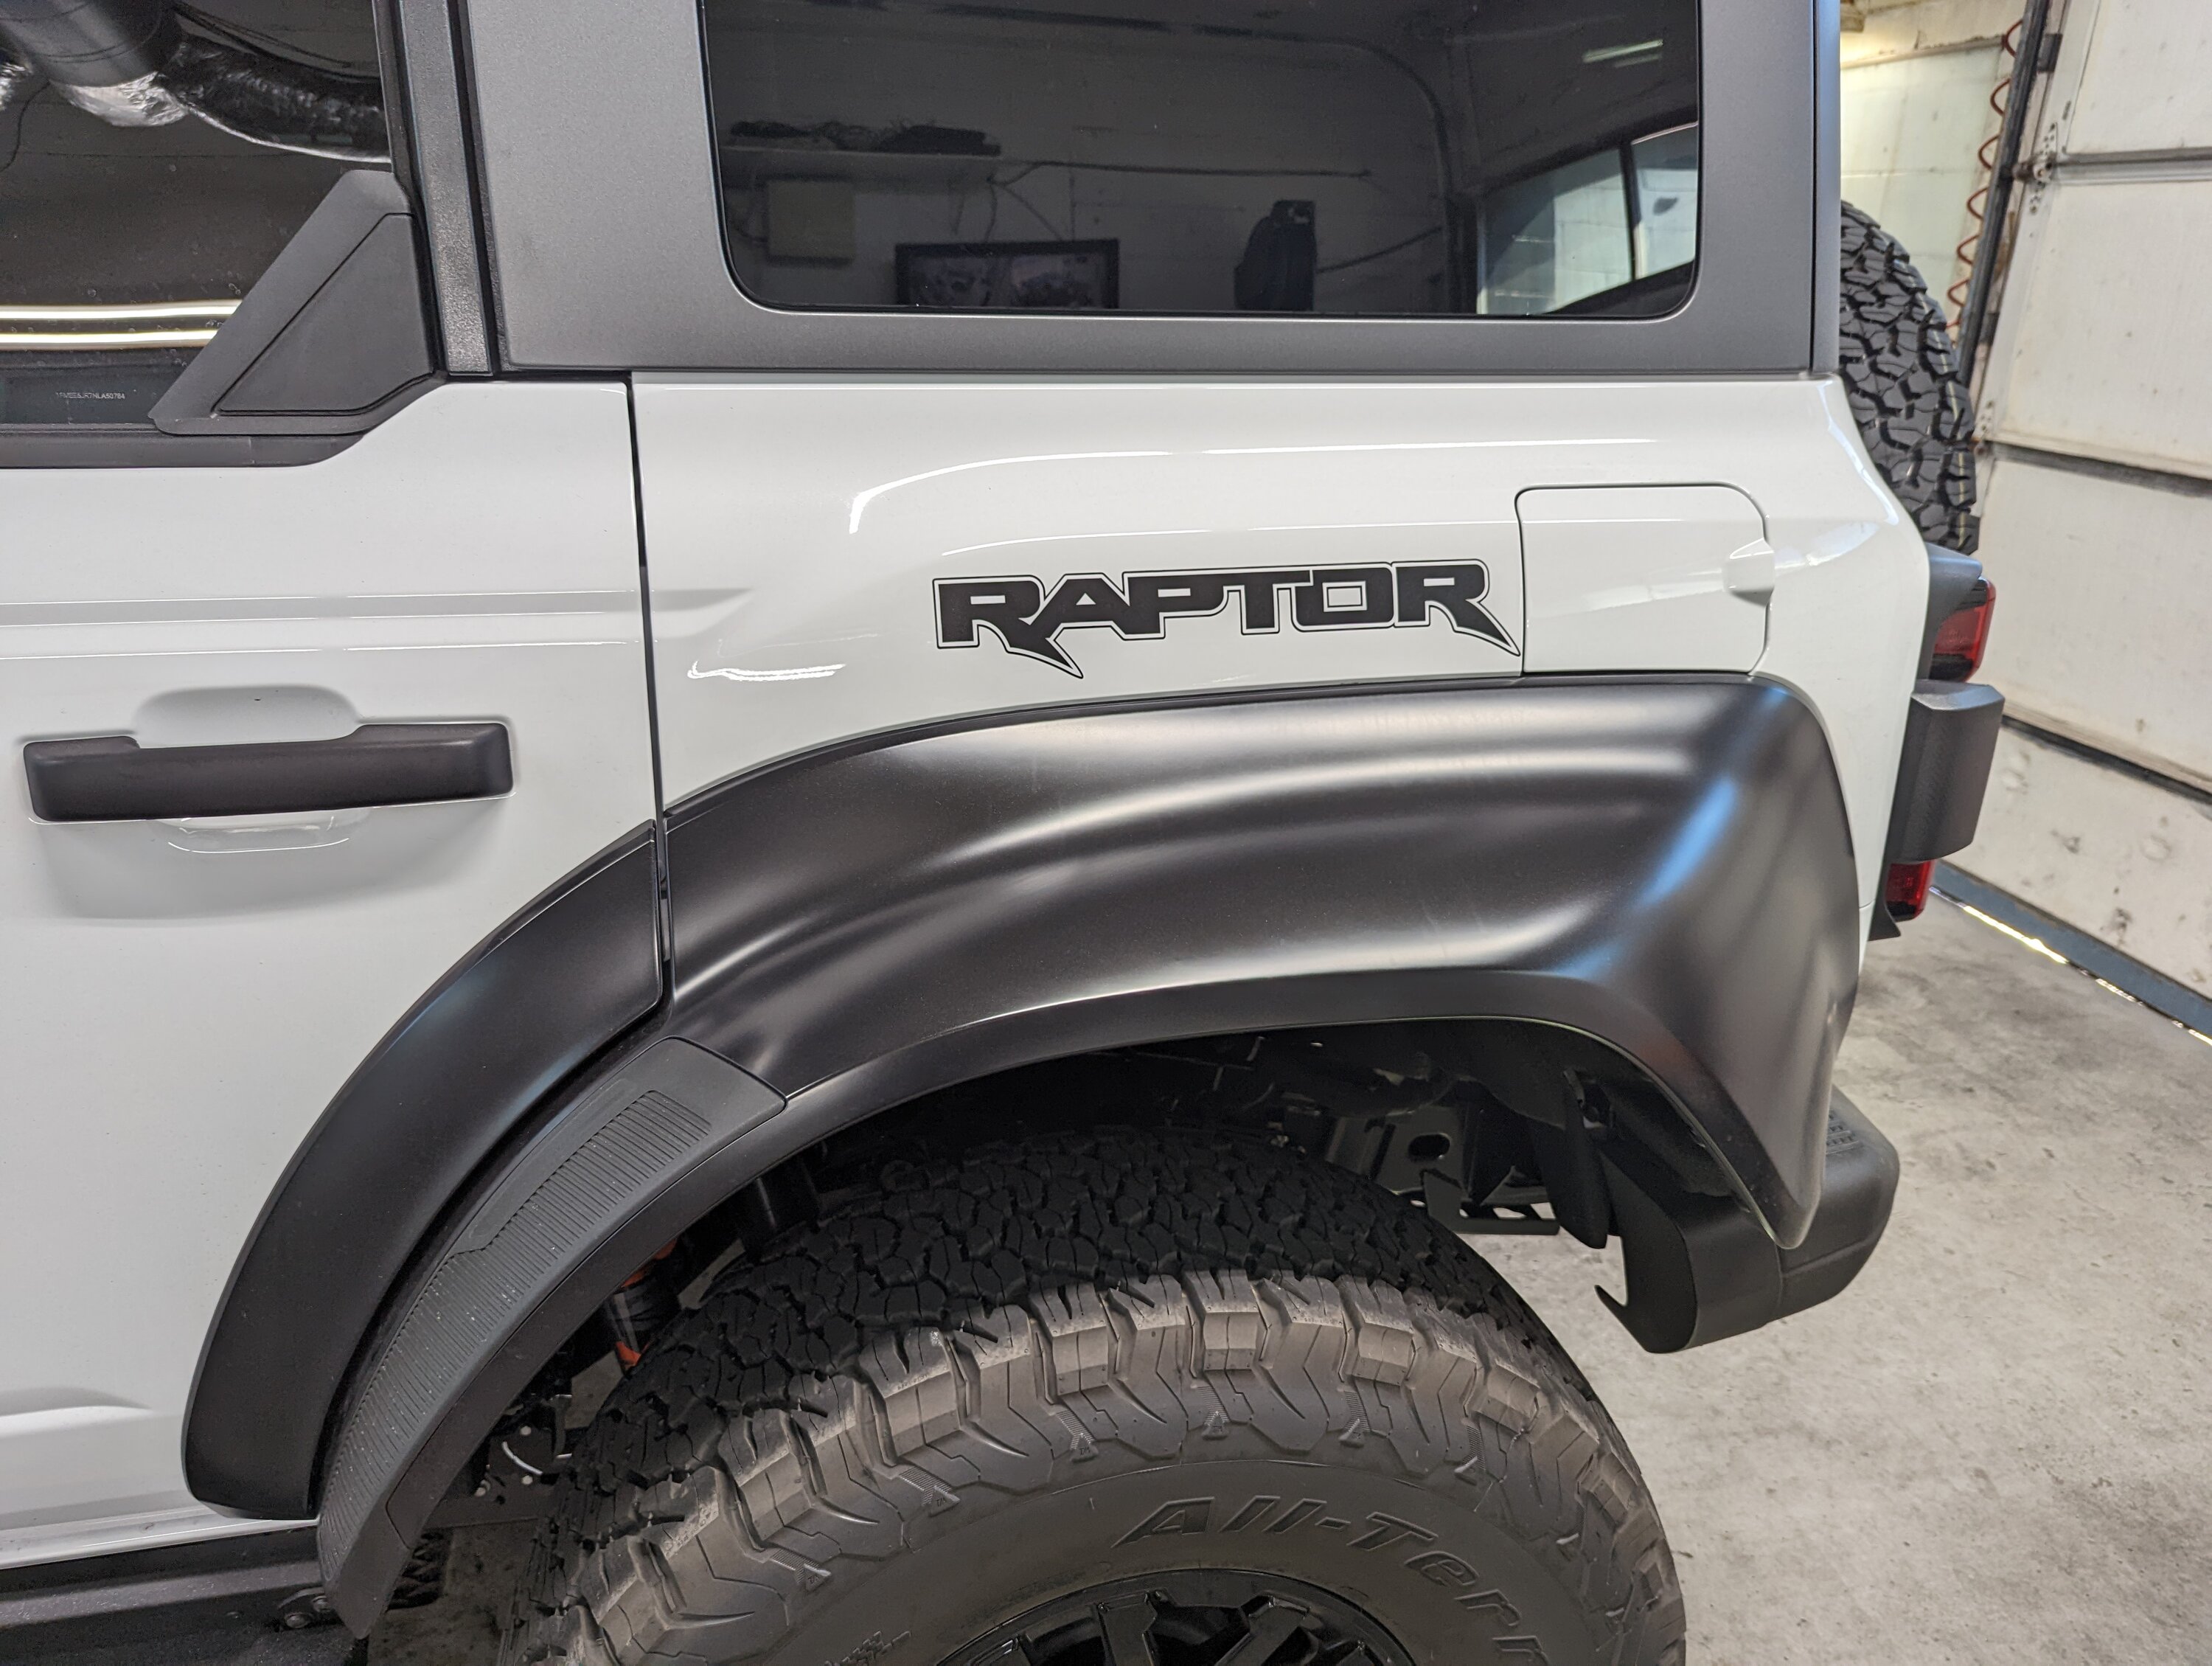 Ford Bronco Custom made my own Raptor factory graphic decal that was discontinued before production Warthog Trademark Application 3